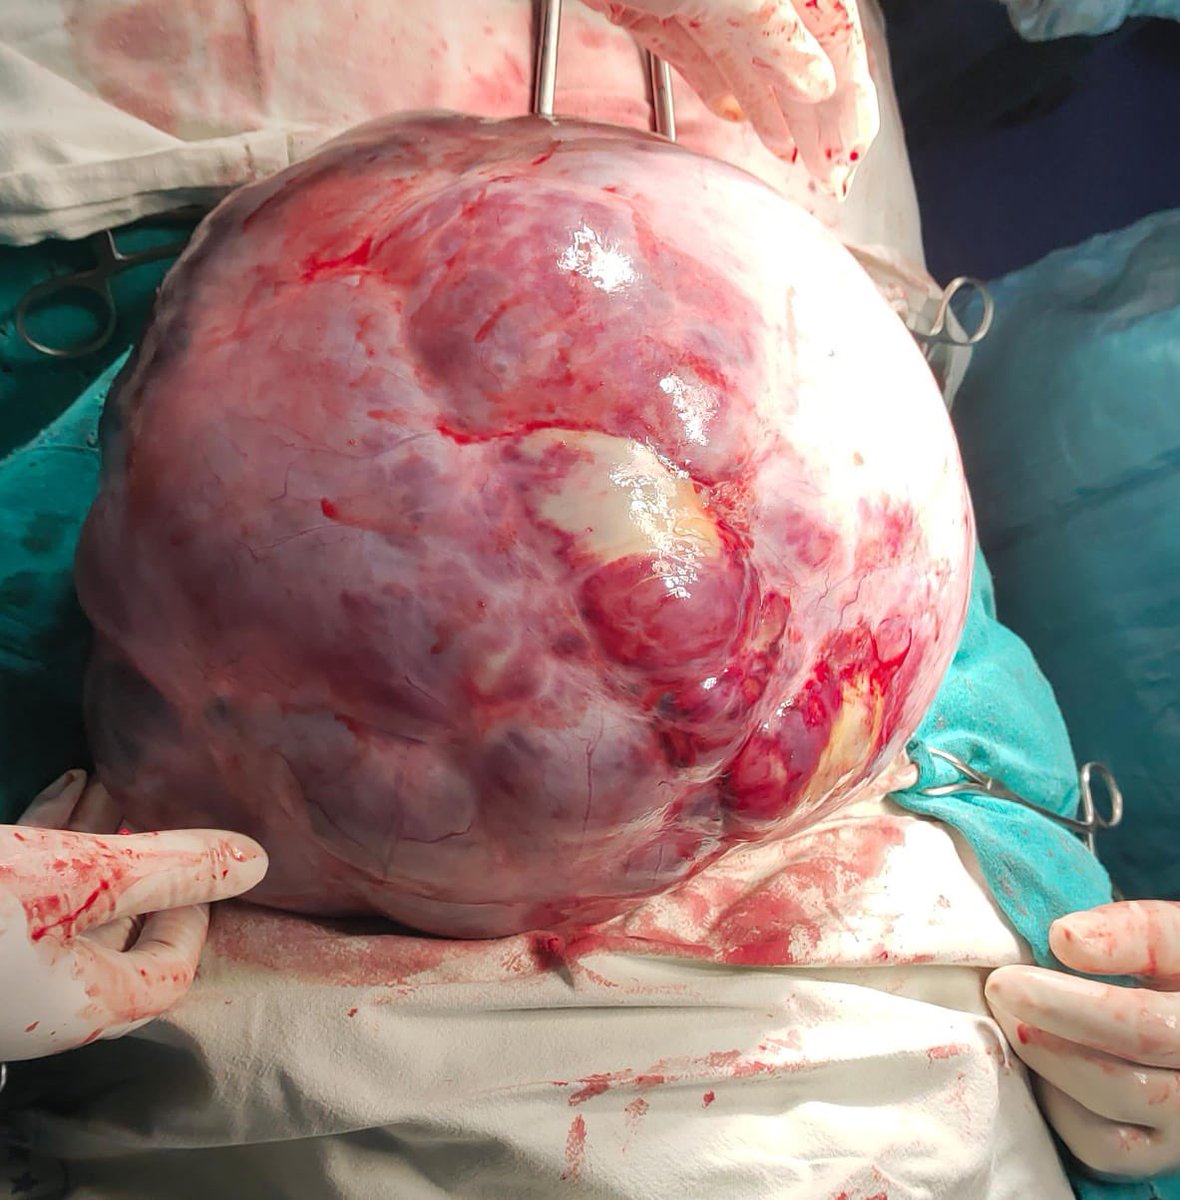 Dept. of Obs. and Gynaecology operated a very rare case of a huge ovarian  tumor weighing 10 kg in a 52 year old diabetic women with previous 2 surgeries. Tumor was suspicious of malignancy intra-operatively and was removed intact . (1/2)
@MoHFW_INDIA #AIIMSBathinda